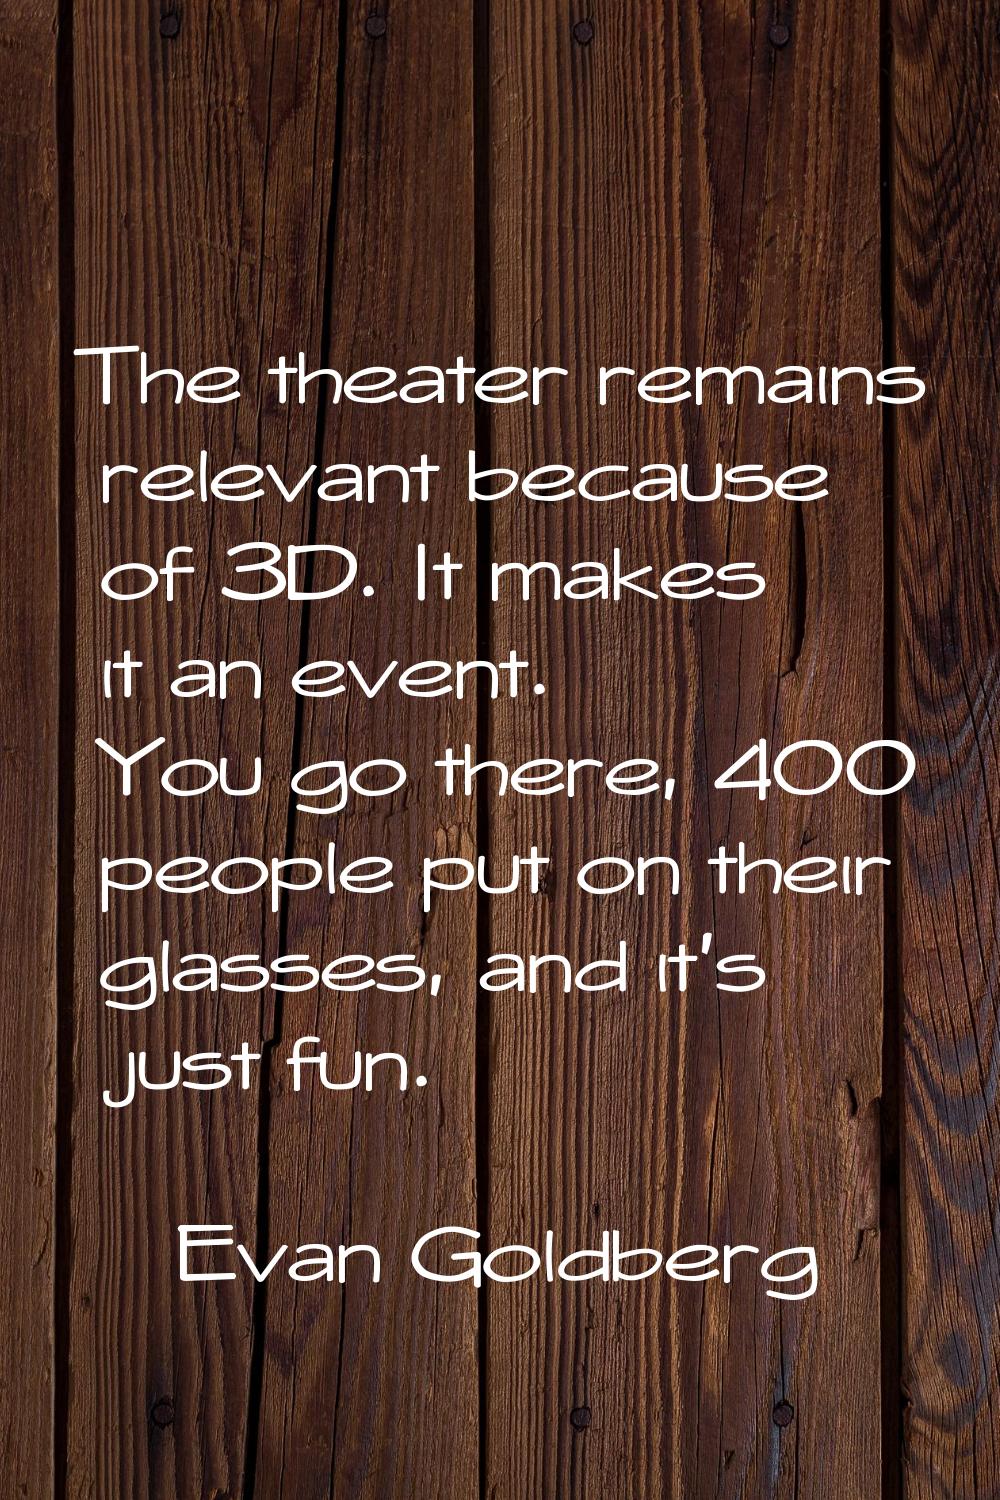 The theater remains relevant because of 3D. It makes it an event. You go there, 400 people put on t